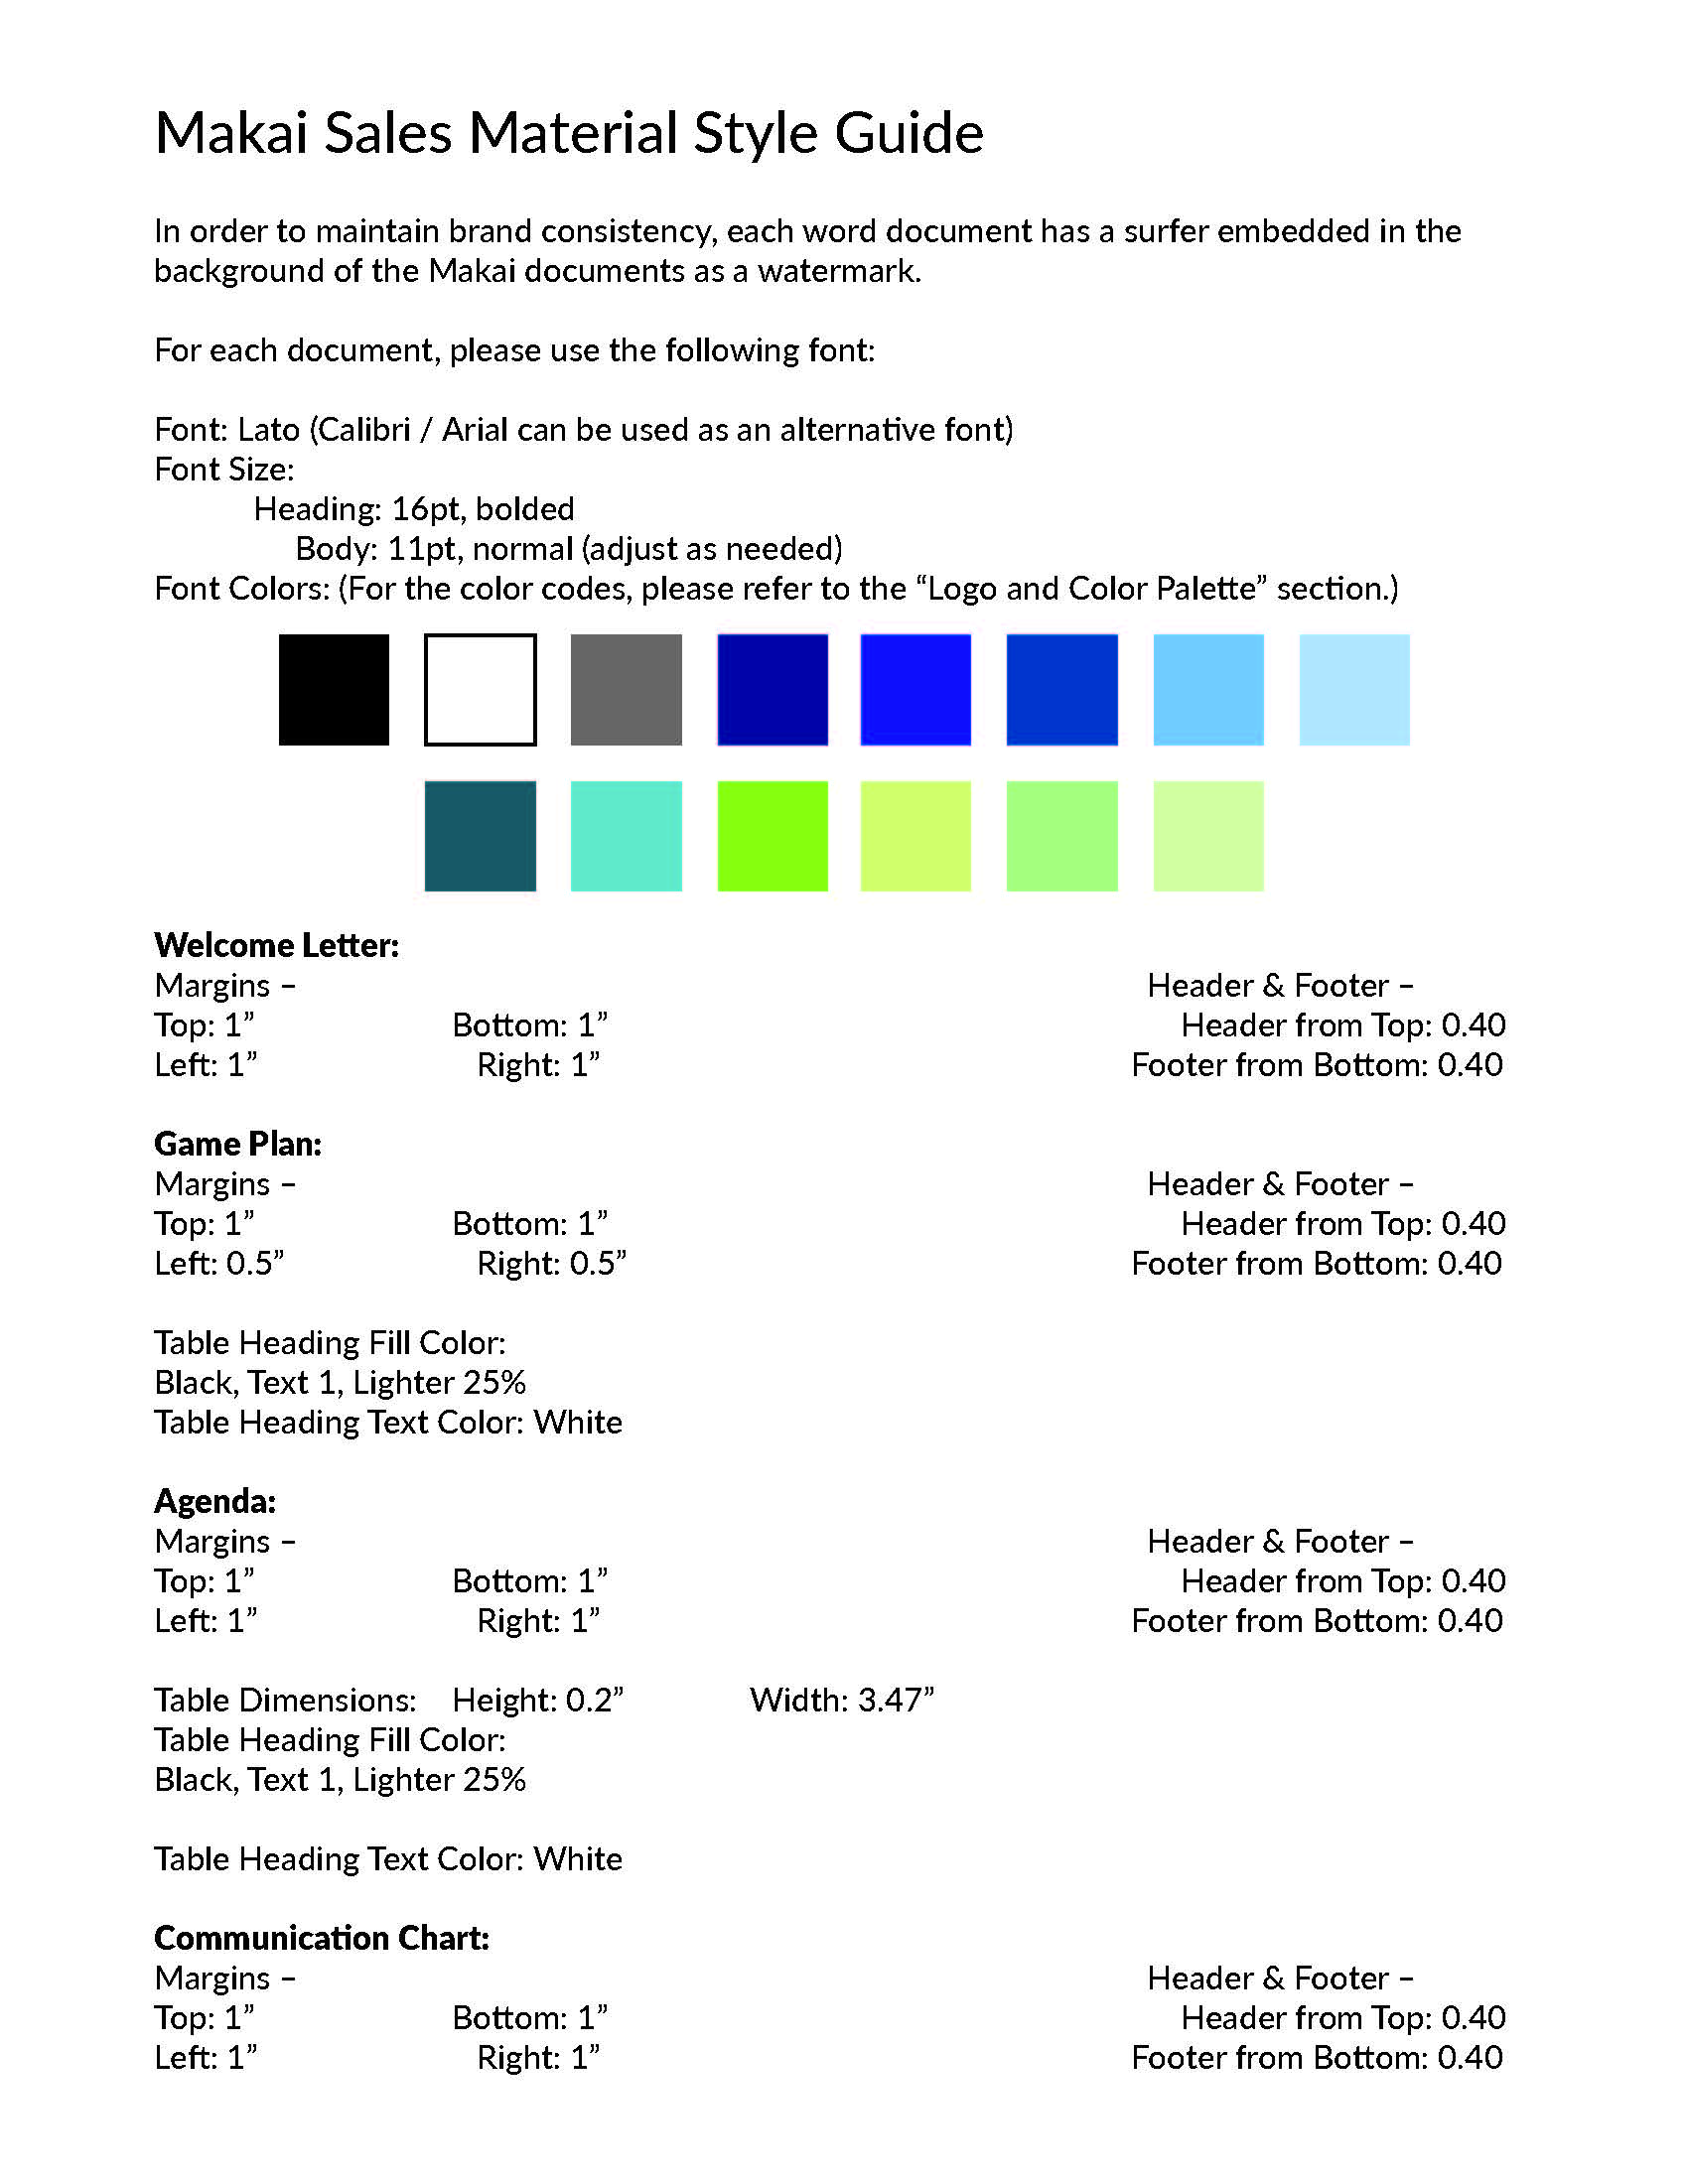 Makai Style Guide_Page_7.jpg